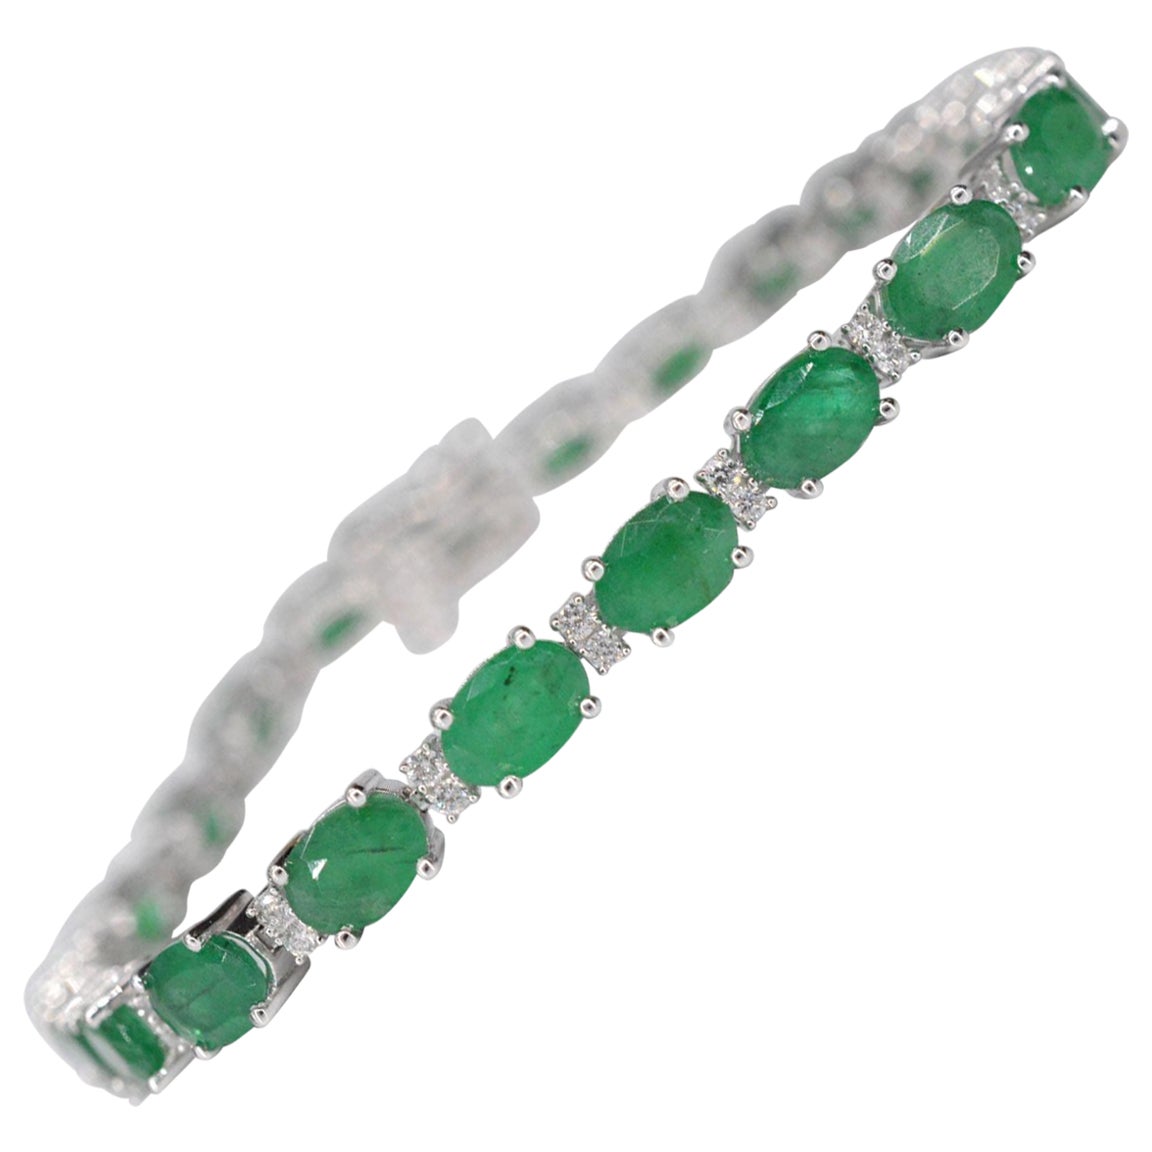 This elegant bracelet features a striking combination of diamonds and emeralds, offering a sophisticated and timeless look. The diamonds weigh a total of 0.50 carats, cut in a brilliant style, with a color grade of F-G and clarity of SI-P. The